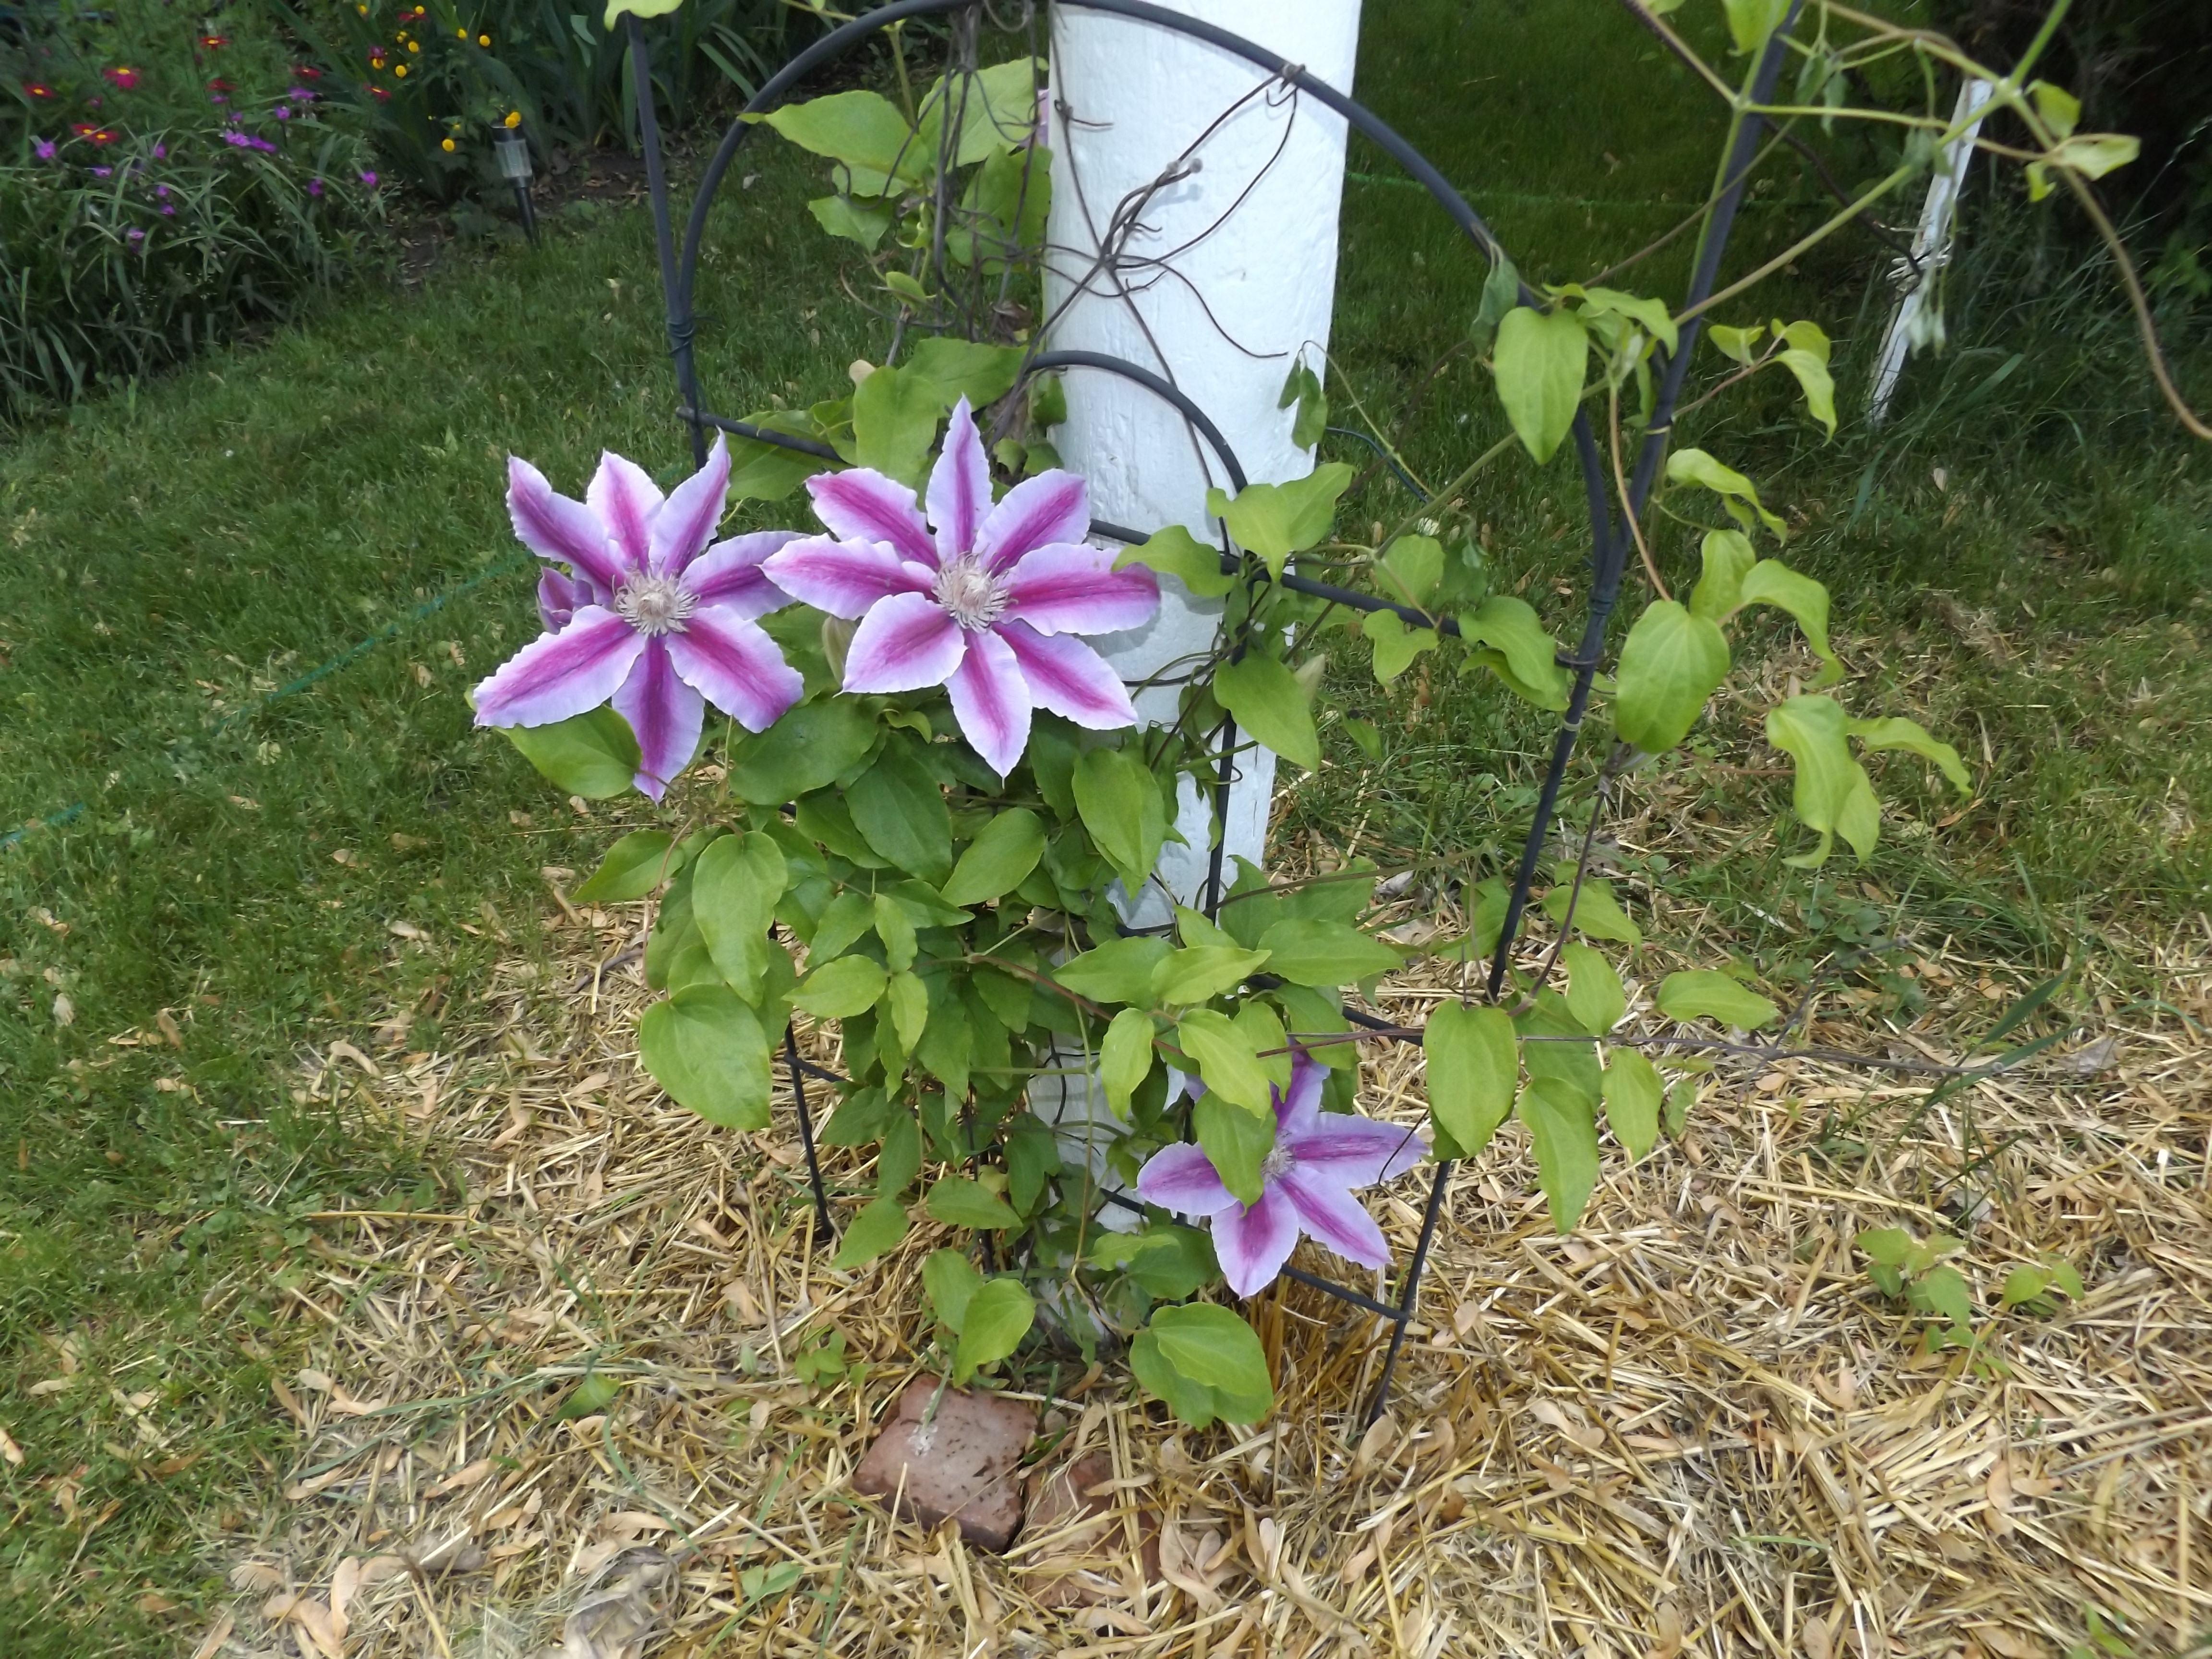 My clematis blooming June 1st. I will plant the four o'clocks in a circle. Stay tuned for some beautiful flowers in late July!